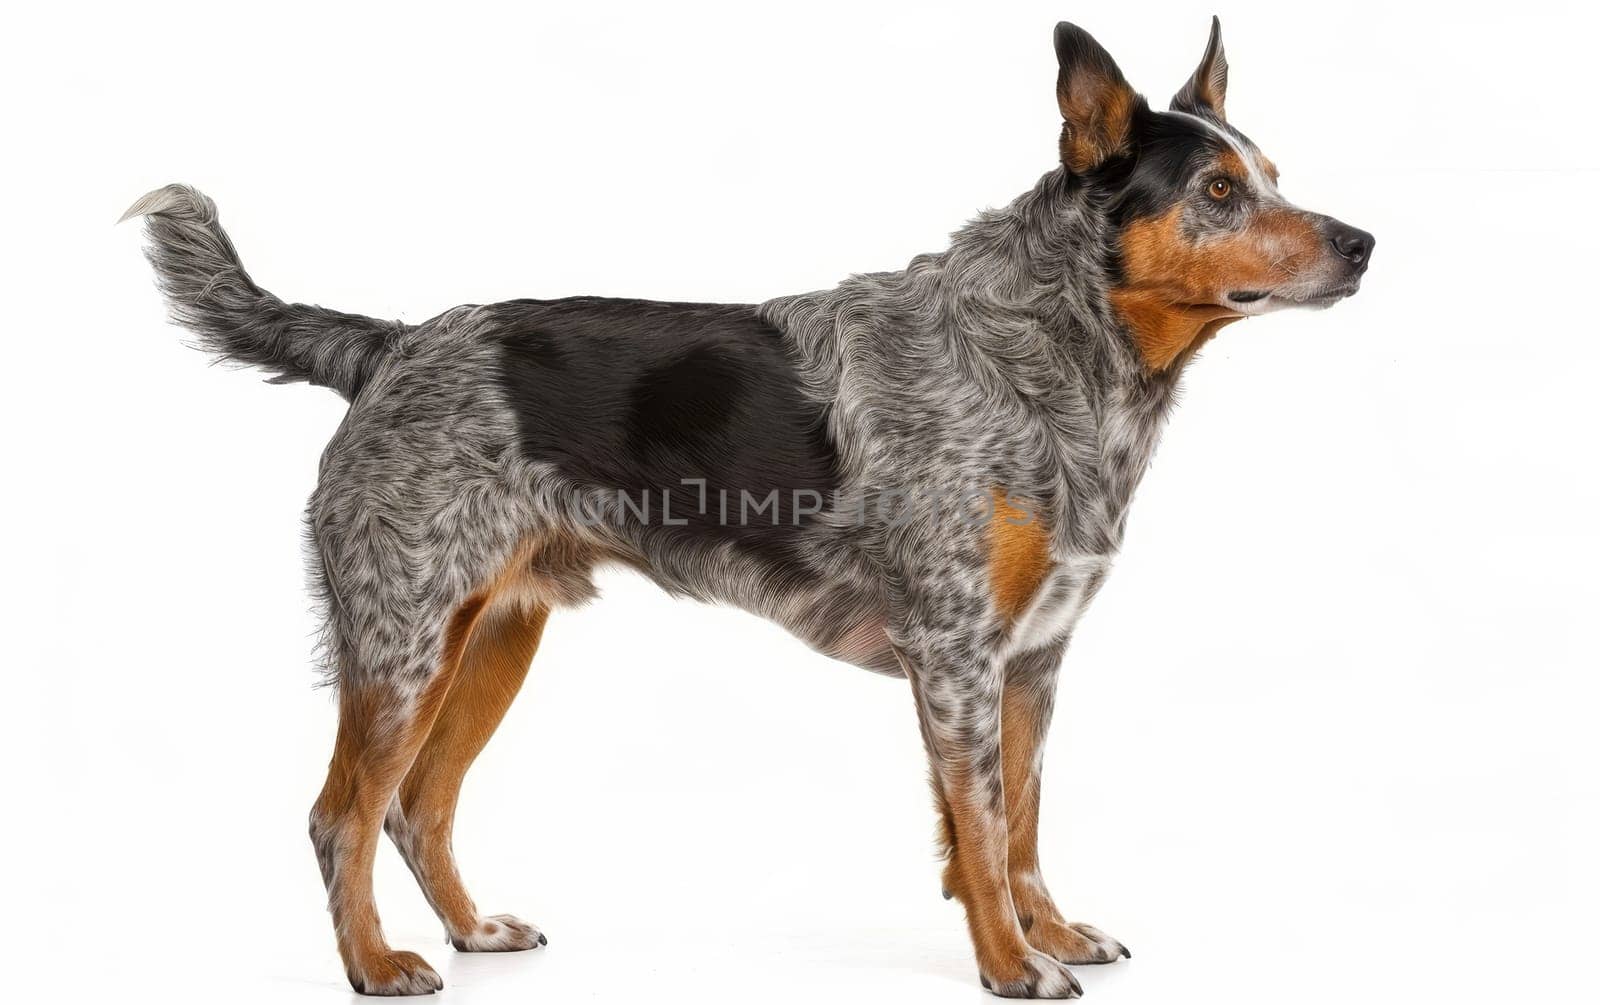 An Australian Cattle Dog stands in profile, ears perked and eyes vigilant. The photo captures the breed's muscular frame and distinctive coat pattern